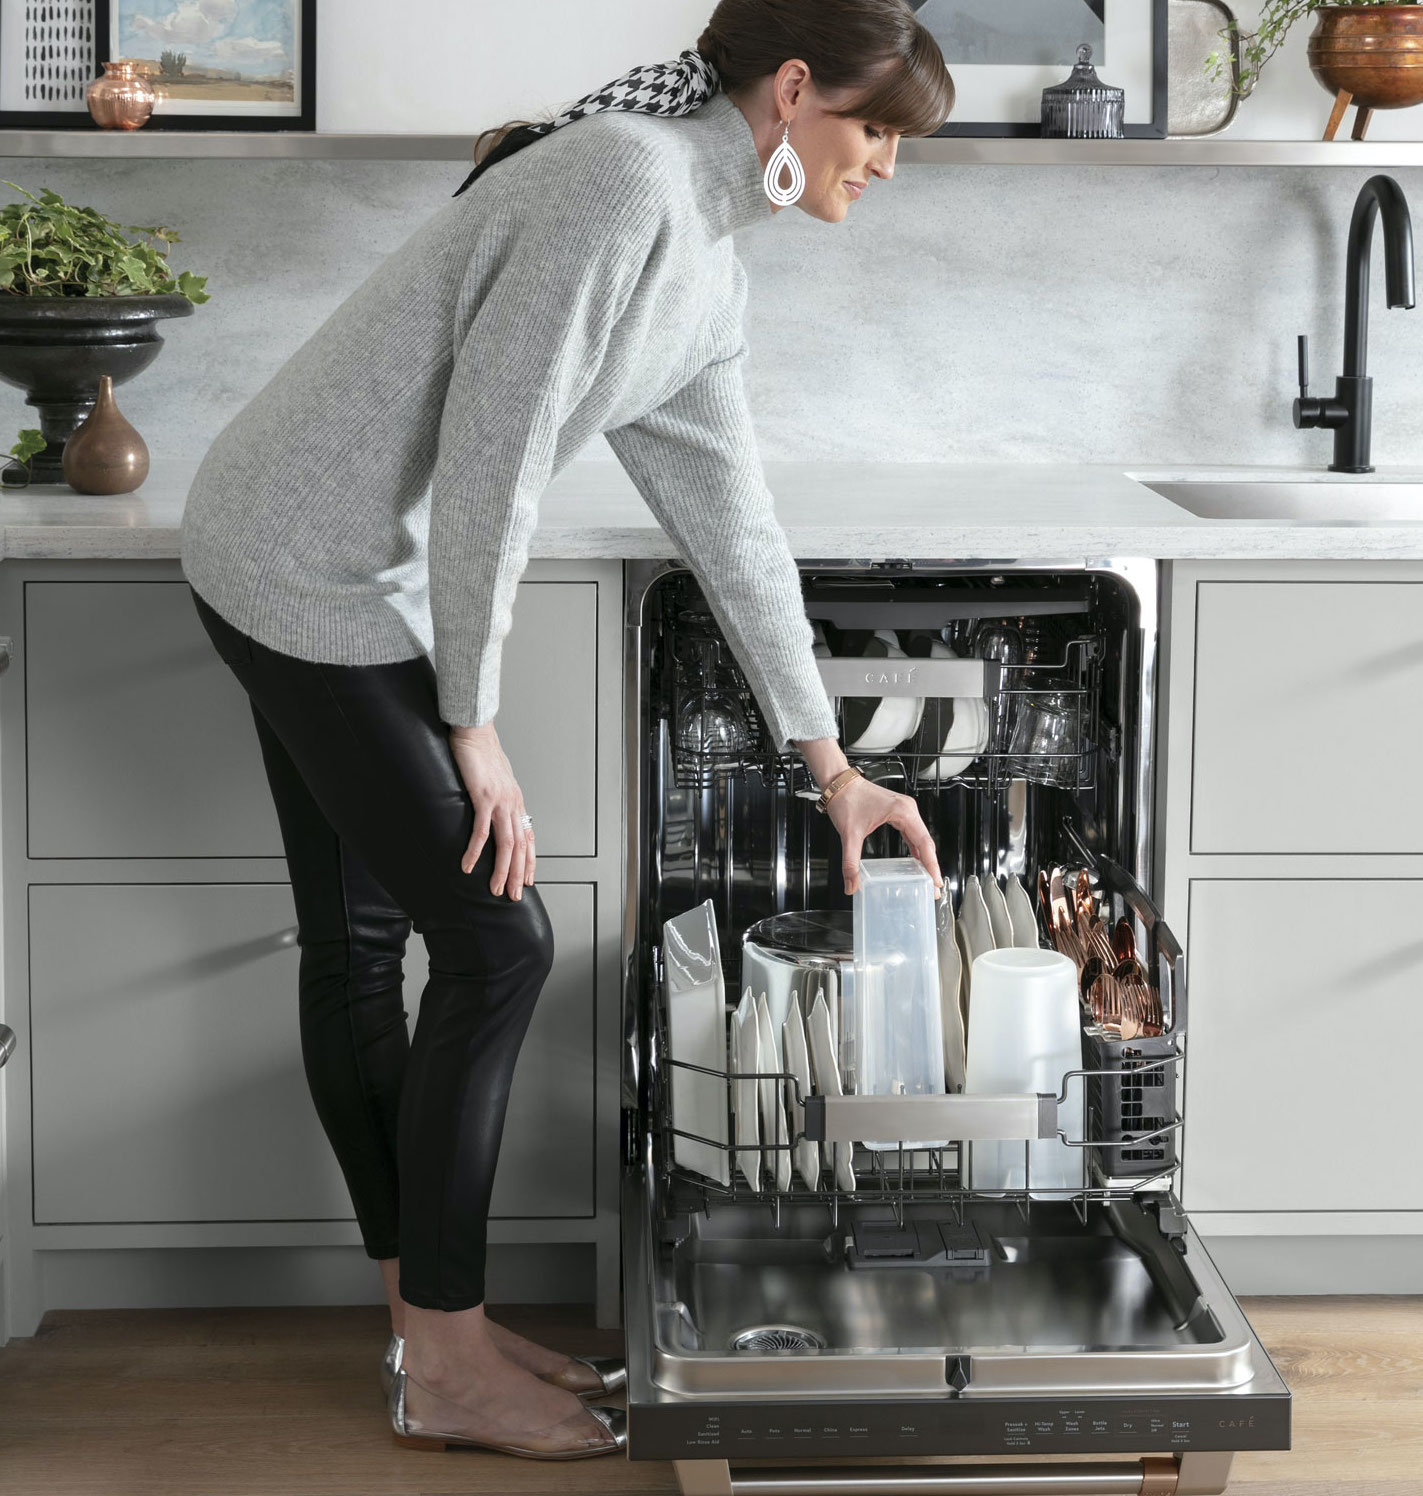 What appliances can you move with - dishwashers